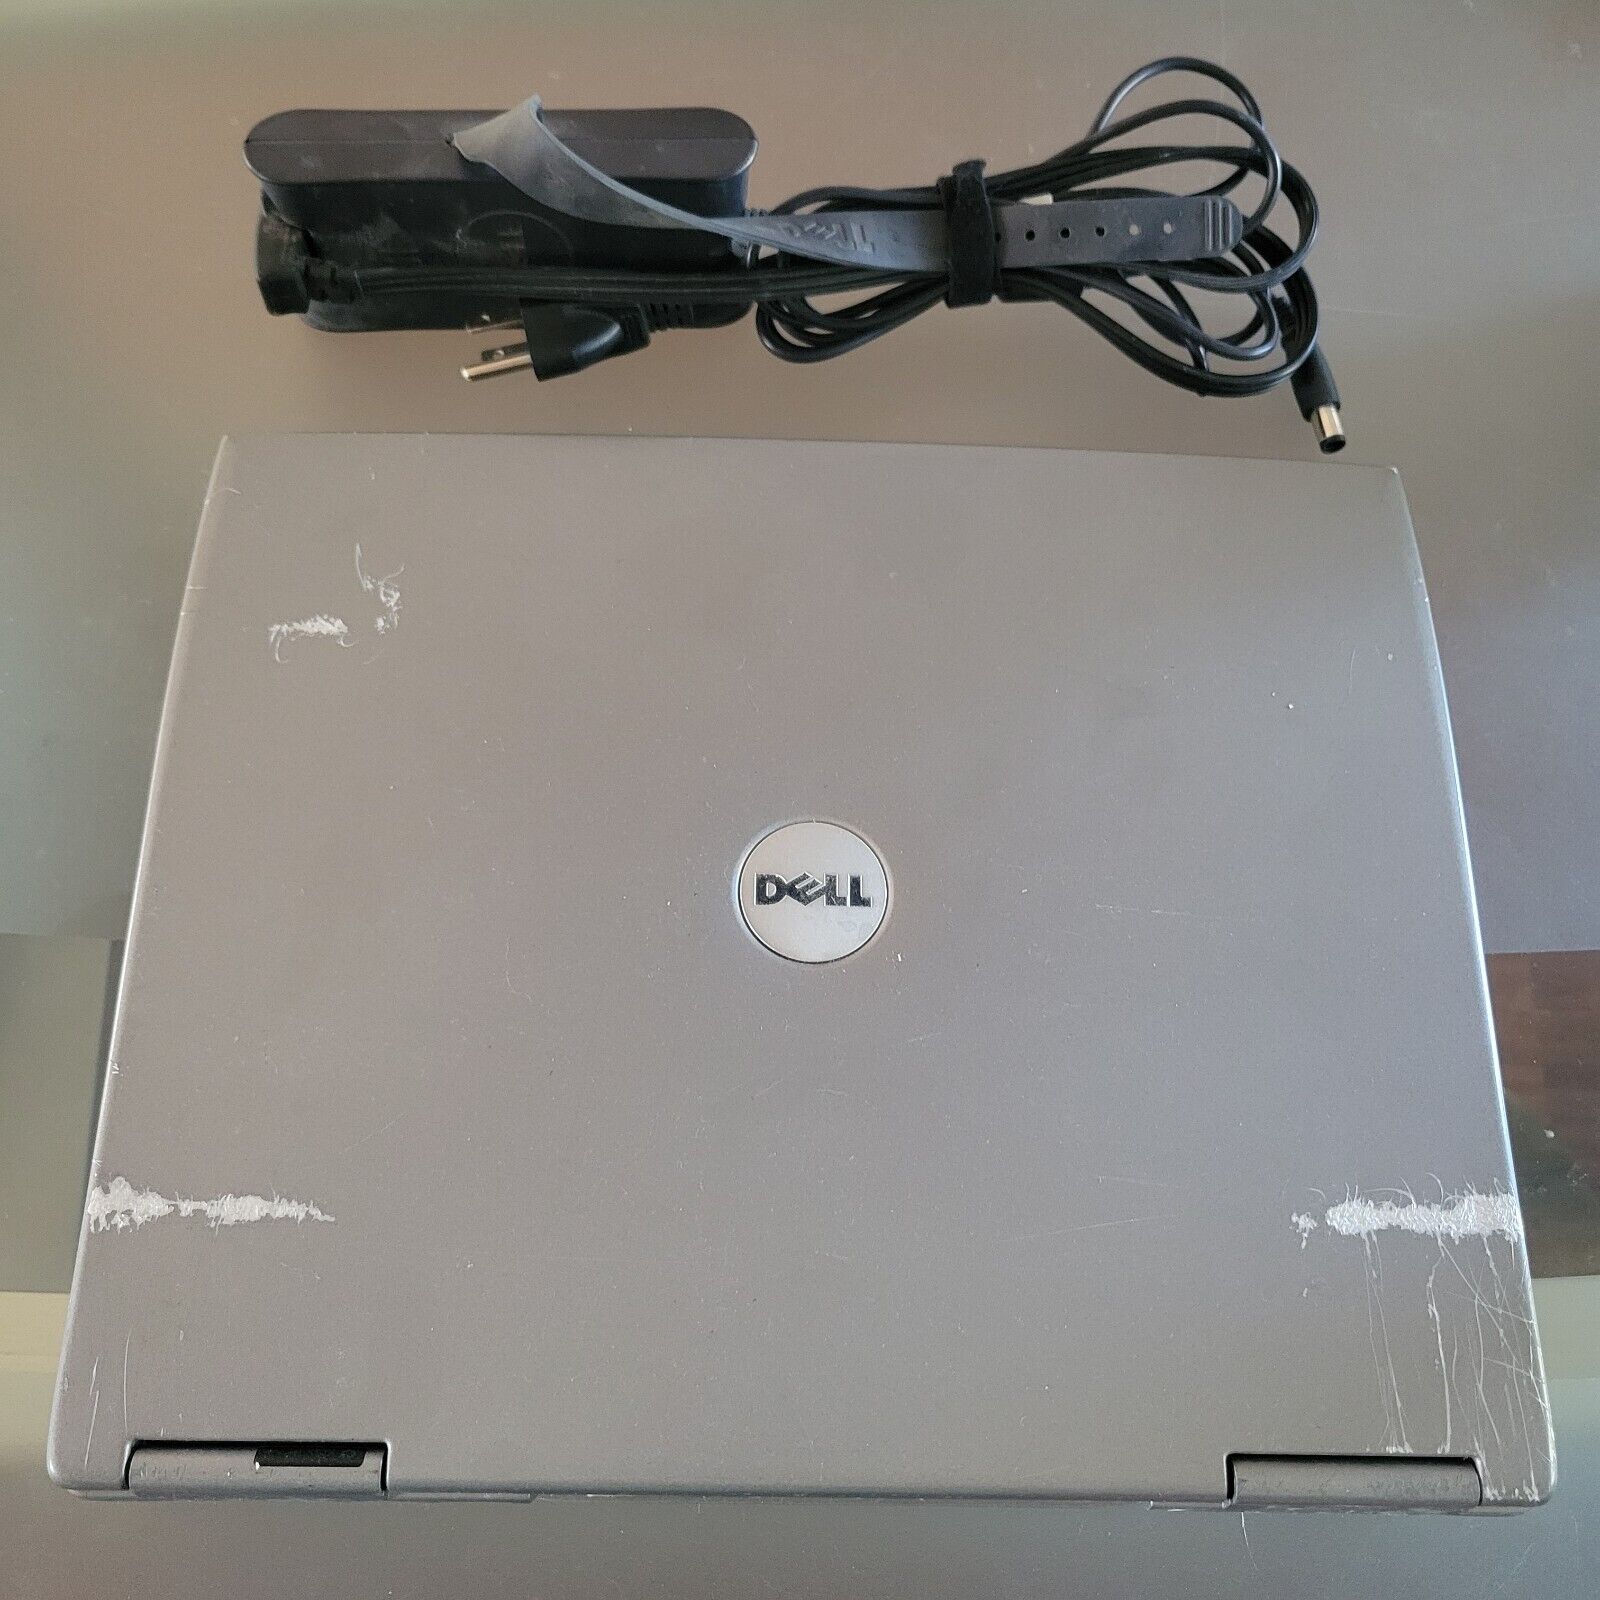 Dell Latitude D600 vintage laptop computer, 40GB HD with AC Cord 